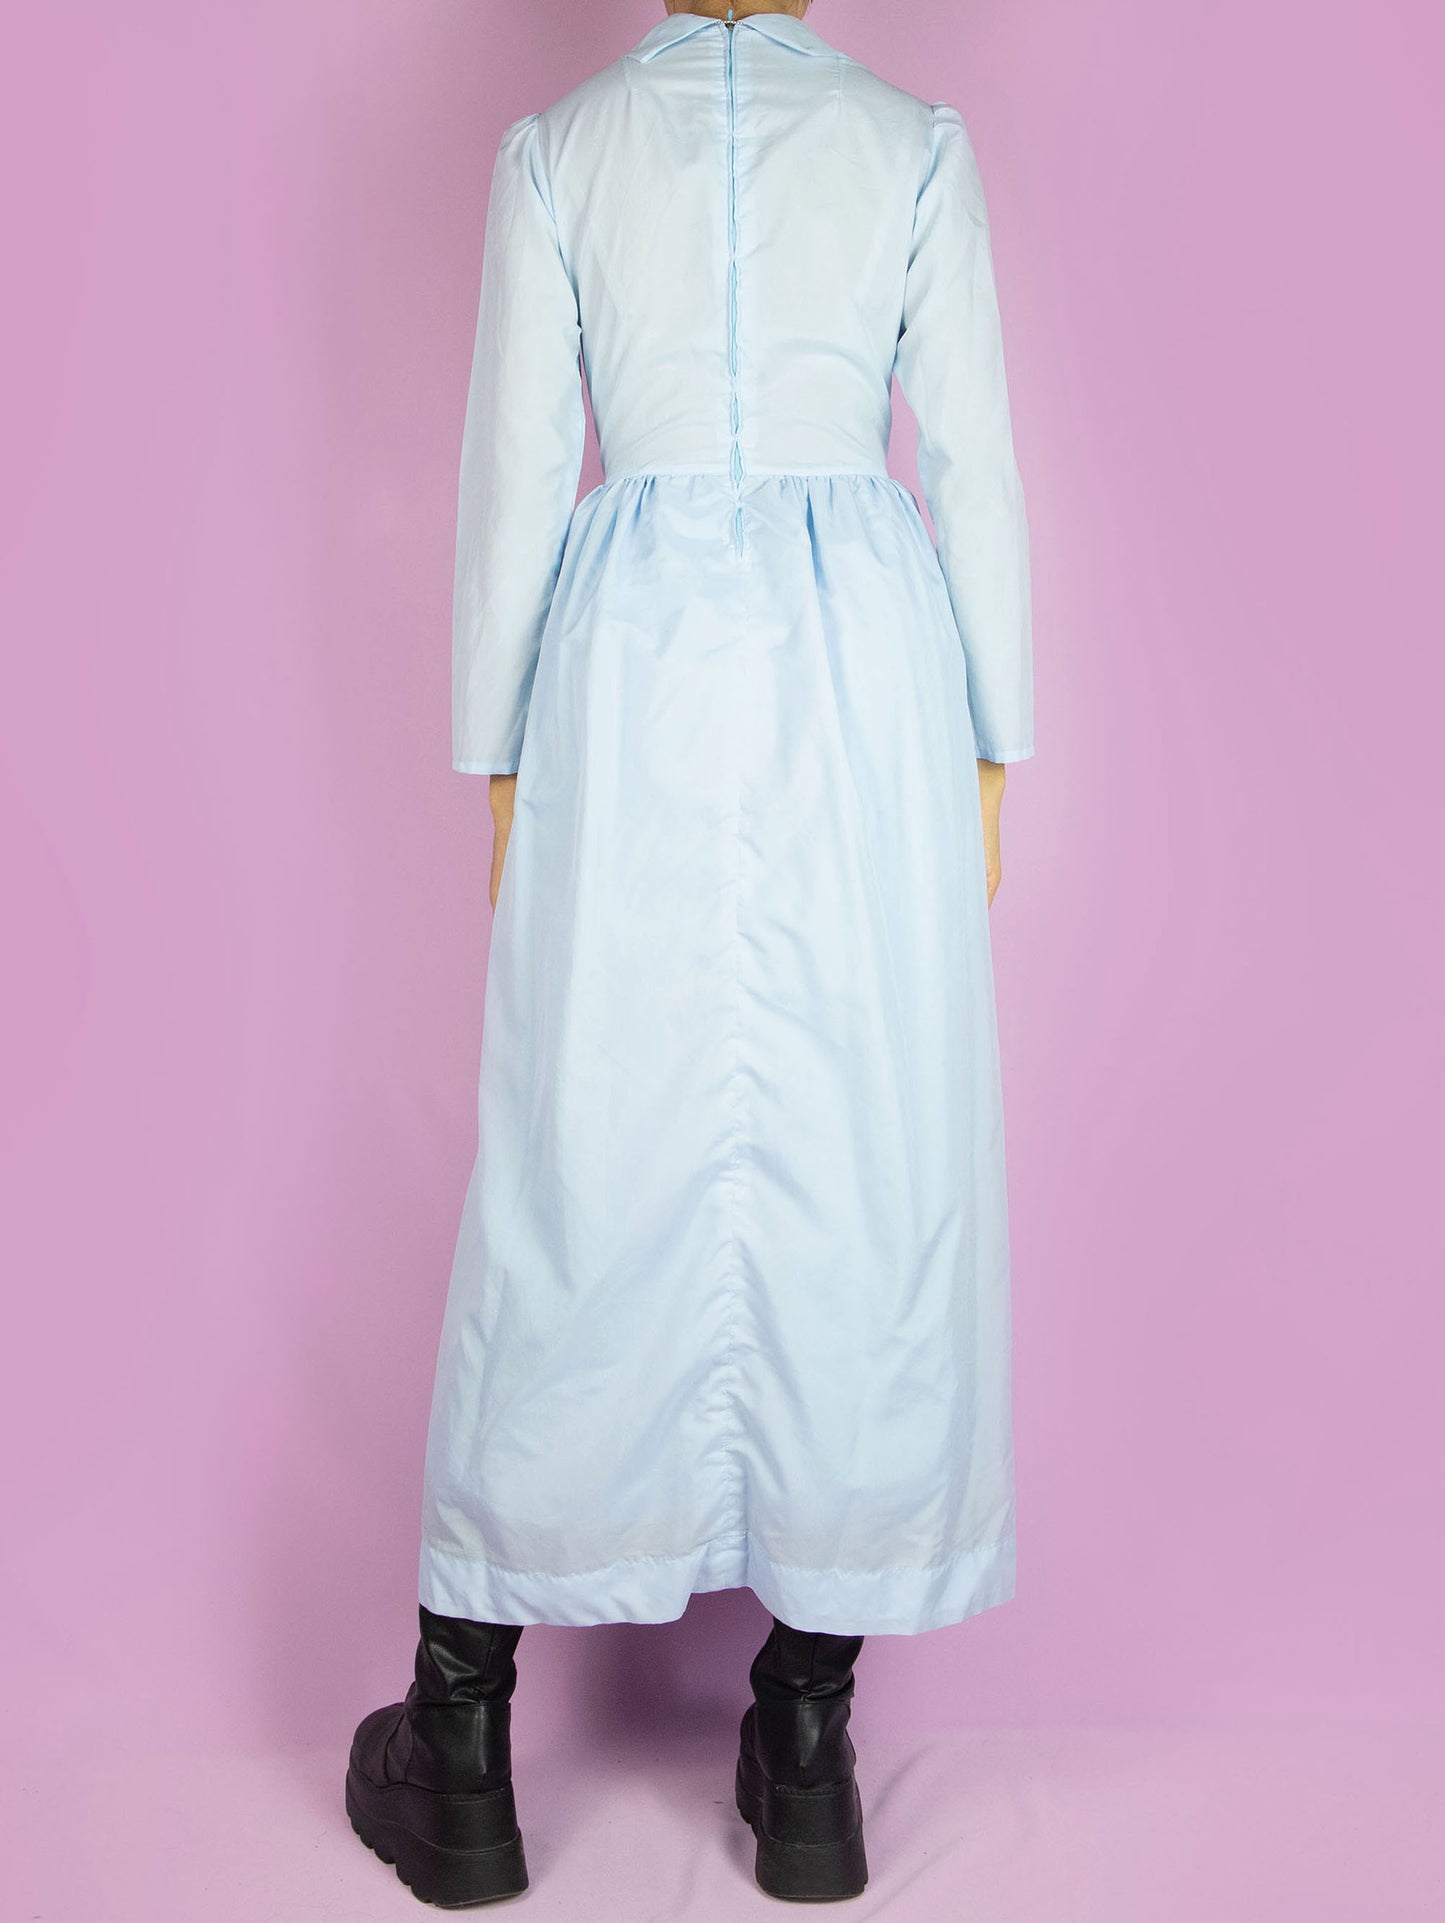 The Vintage 70s Cottage Prairie Maxi Dress is a light pastel blue long-sleeved dress with a collar and a zipper closure at the back. Country western inspired 1970s midi dress.